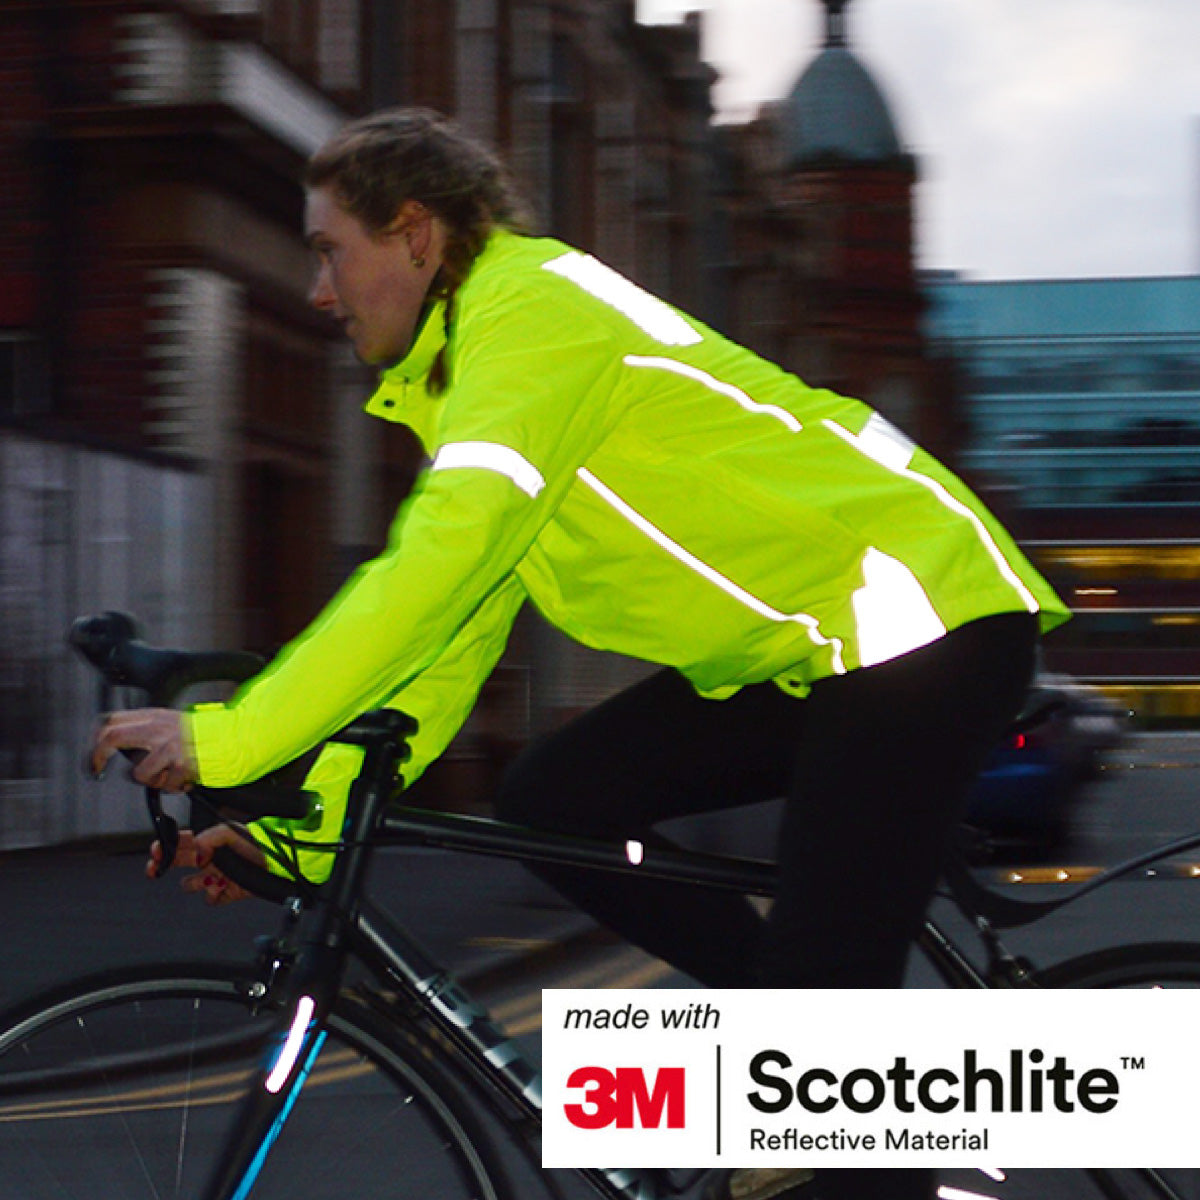 Image of person on bike wearing cycling jacket. 